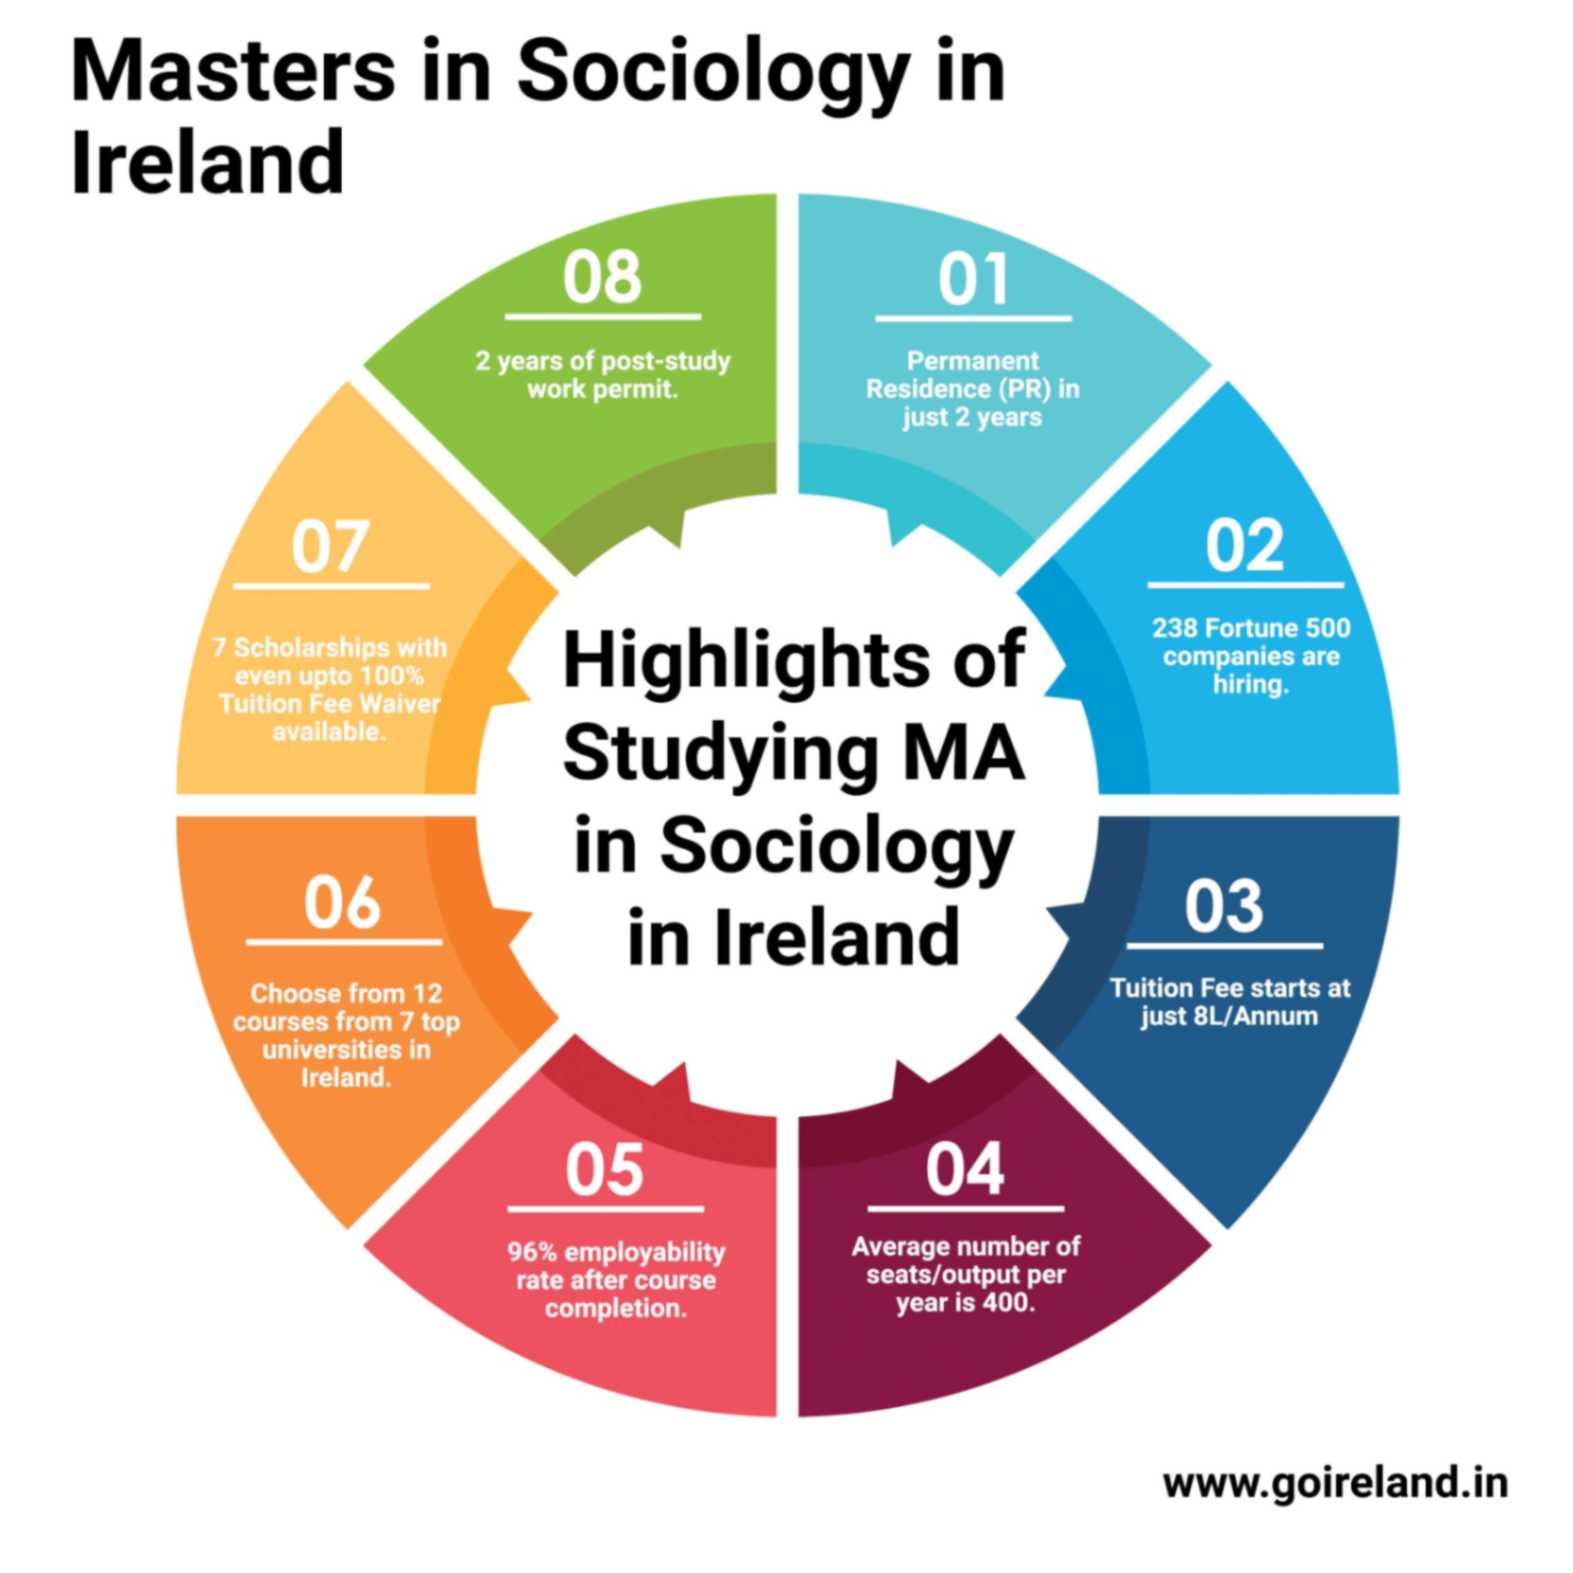 Masters in Sociology in Ireland